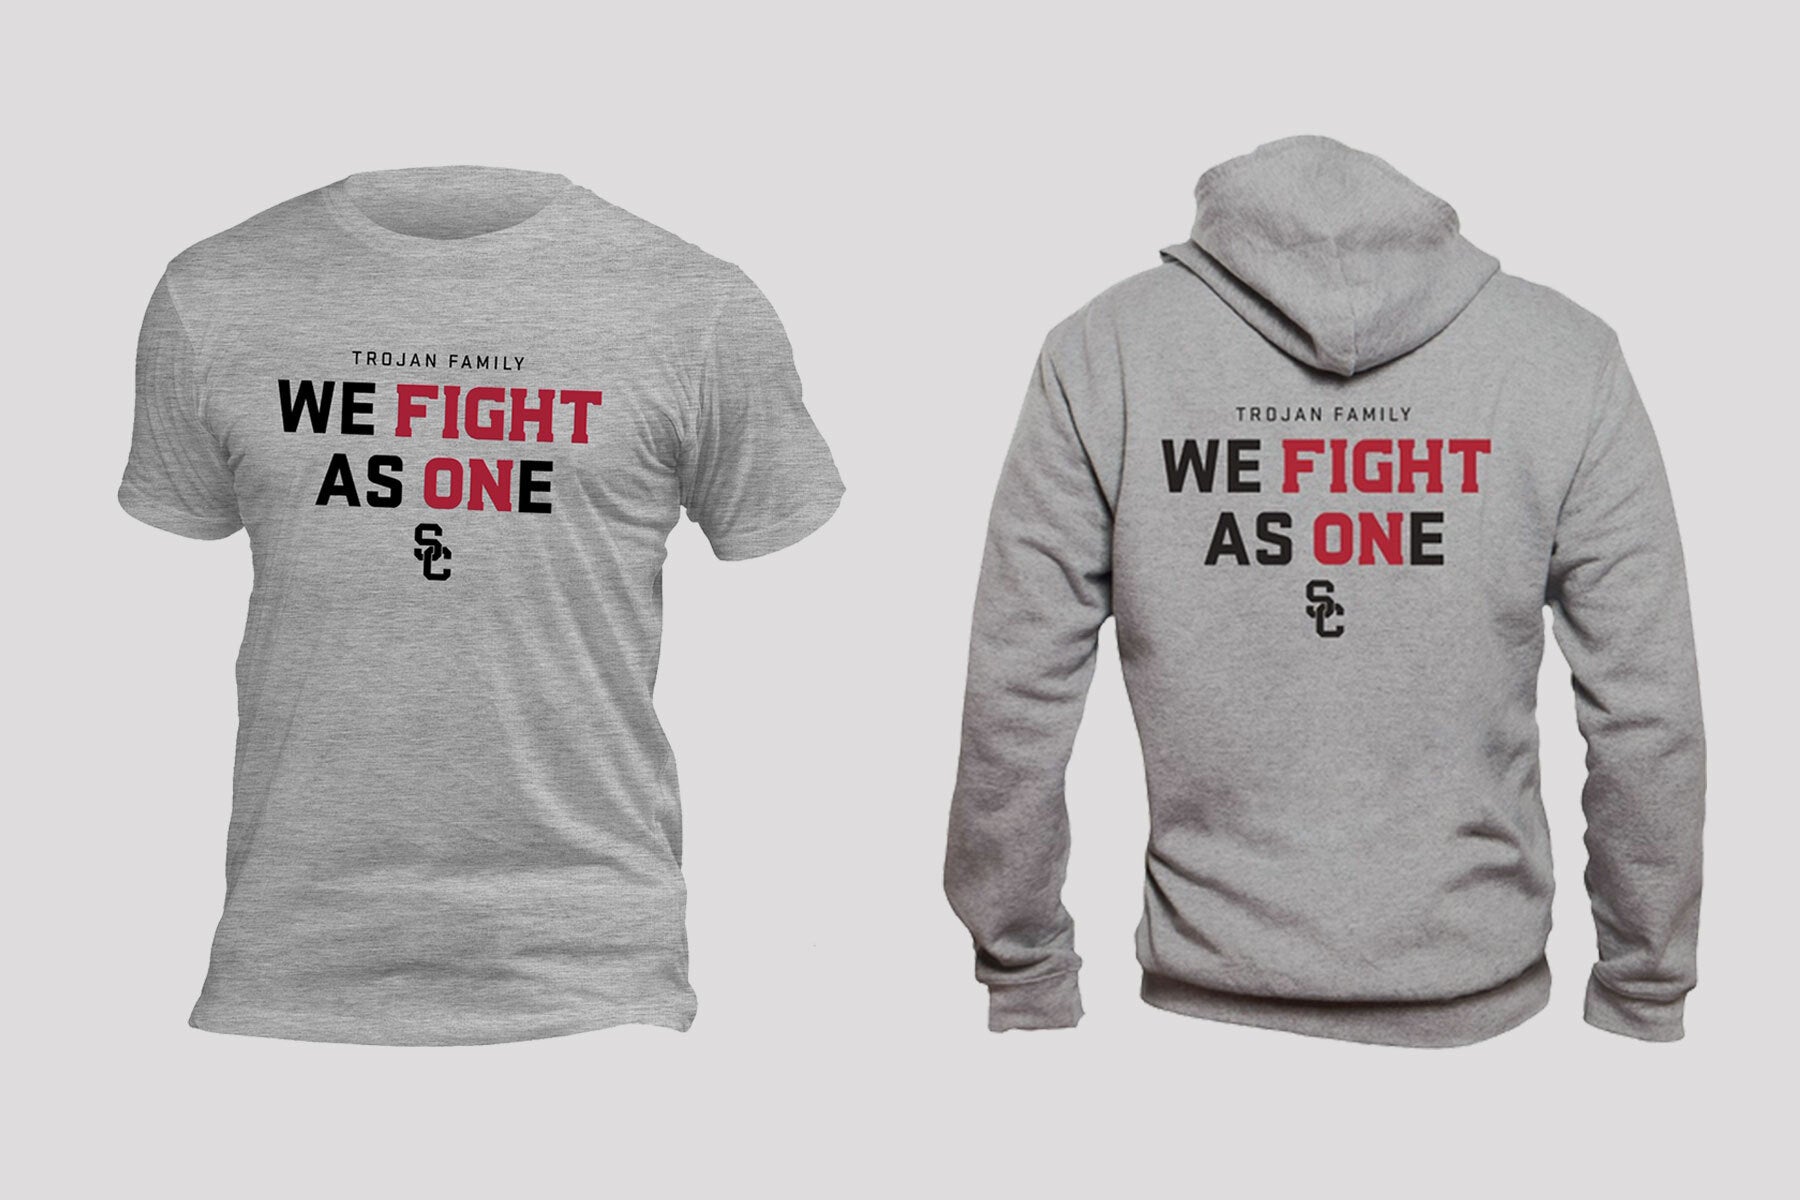 We Fight As One USC shirts